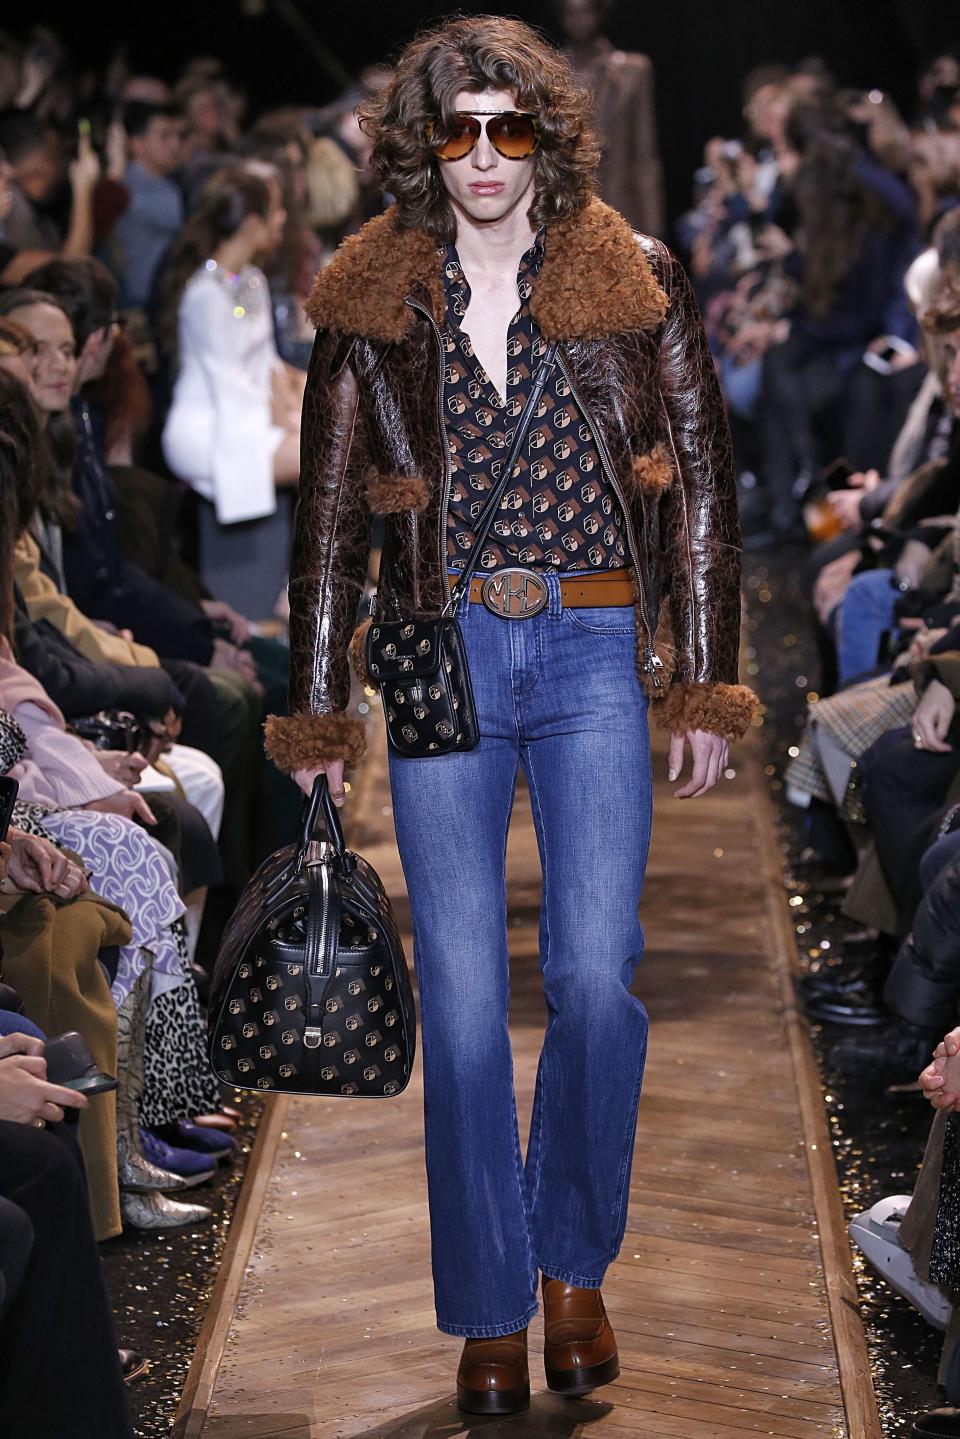 <h1 class="title">Michael Kors - Runway - February 2019 - New York Fashion Week</h1><cite class="credit">Victor Virgile / Getty Images</cite>